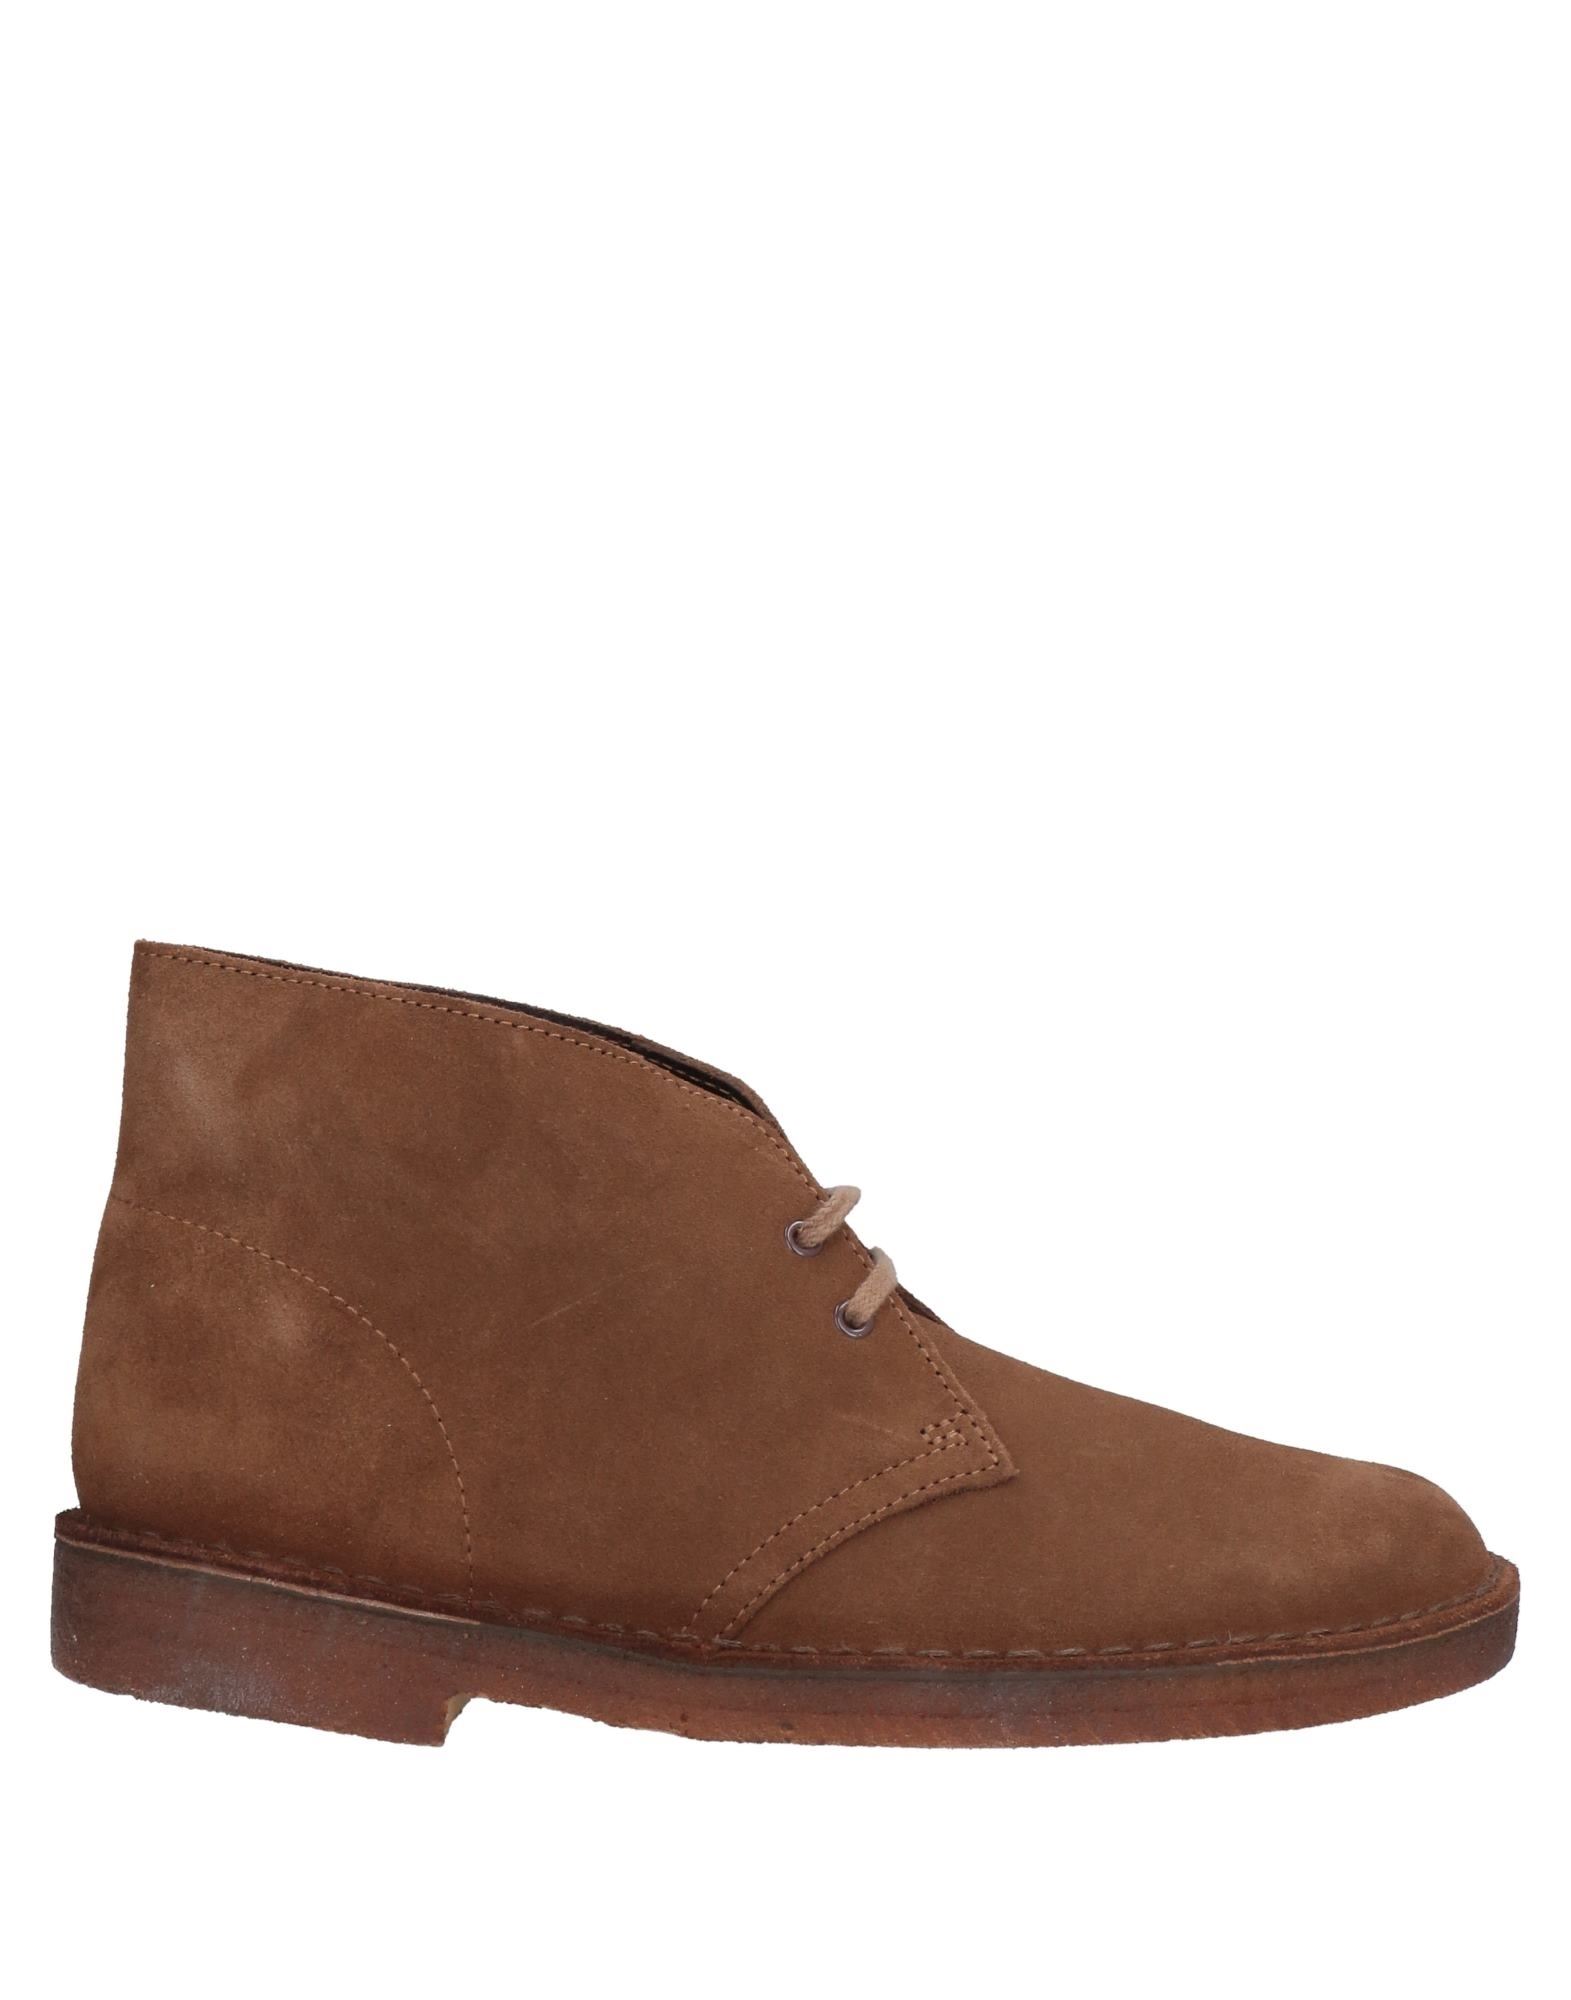 Clarks Originals Ankle Boots In Camel